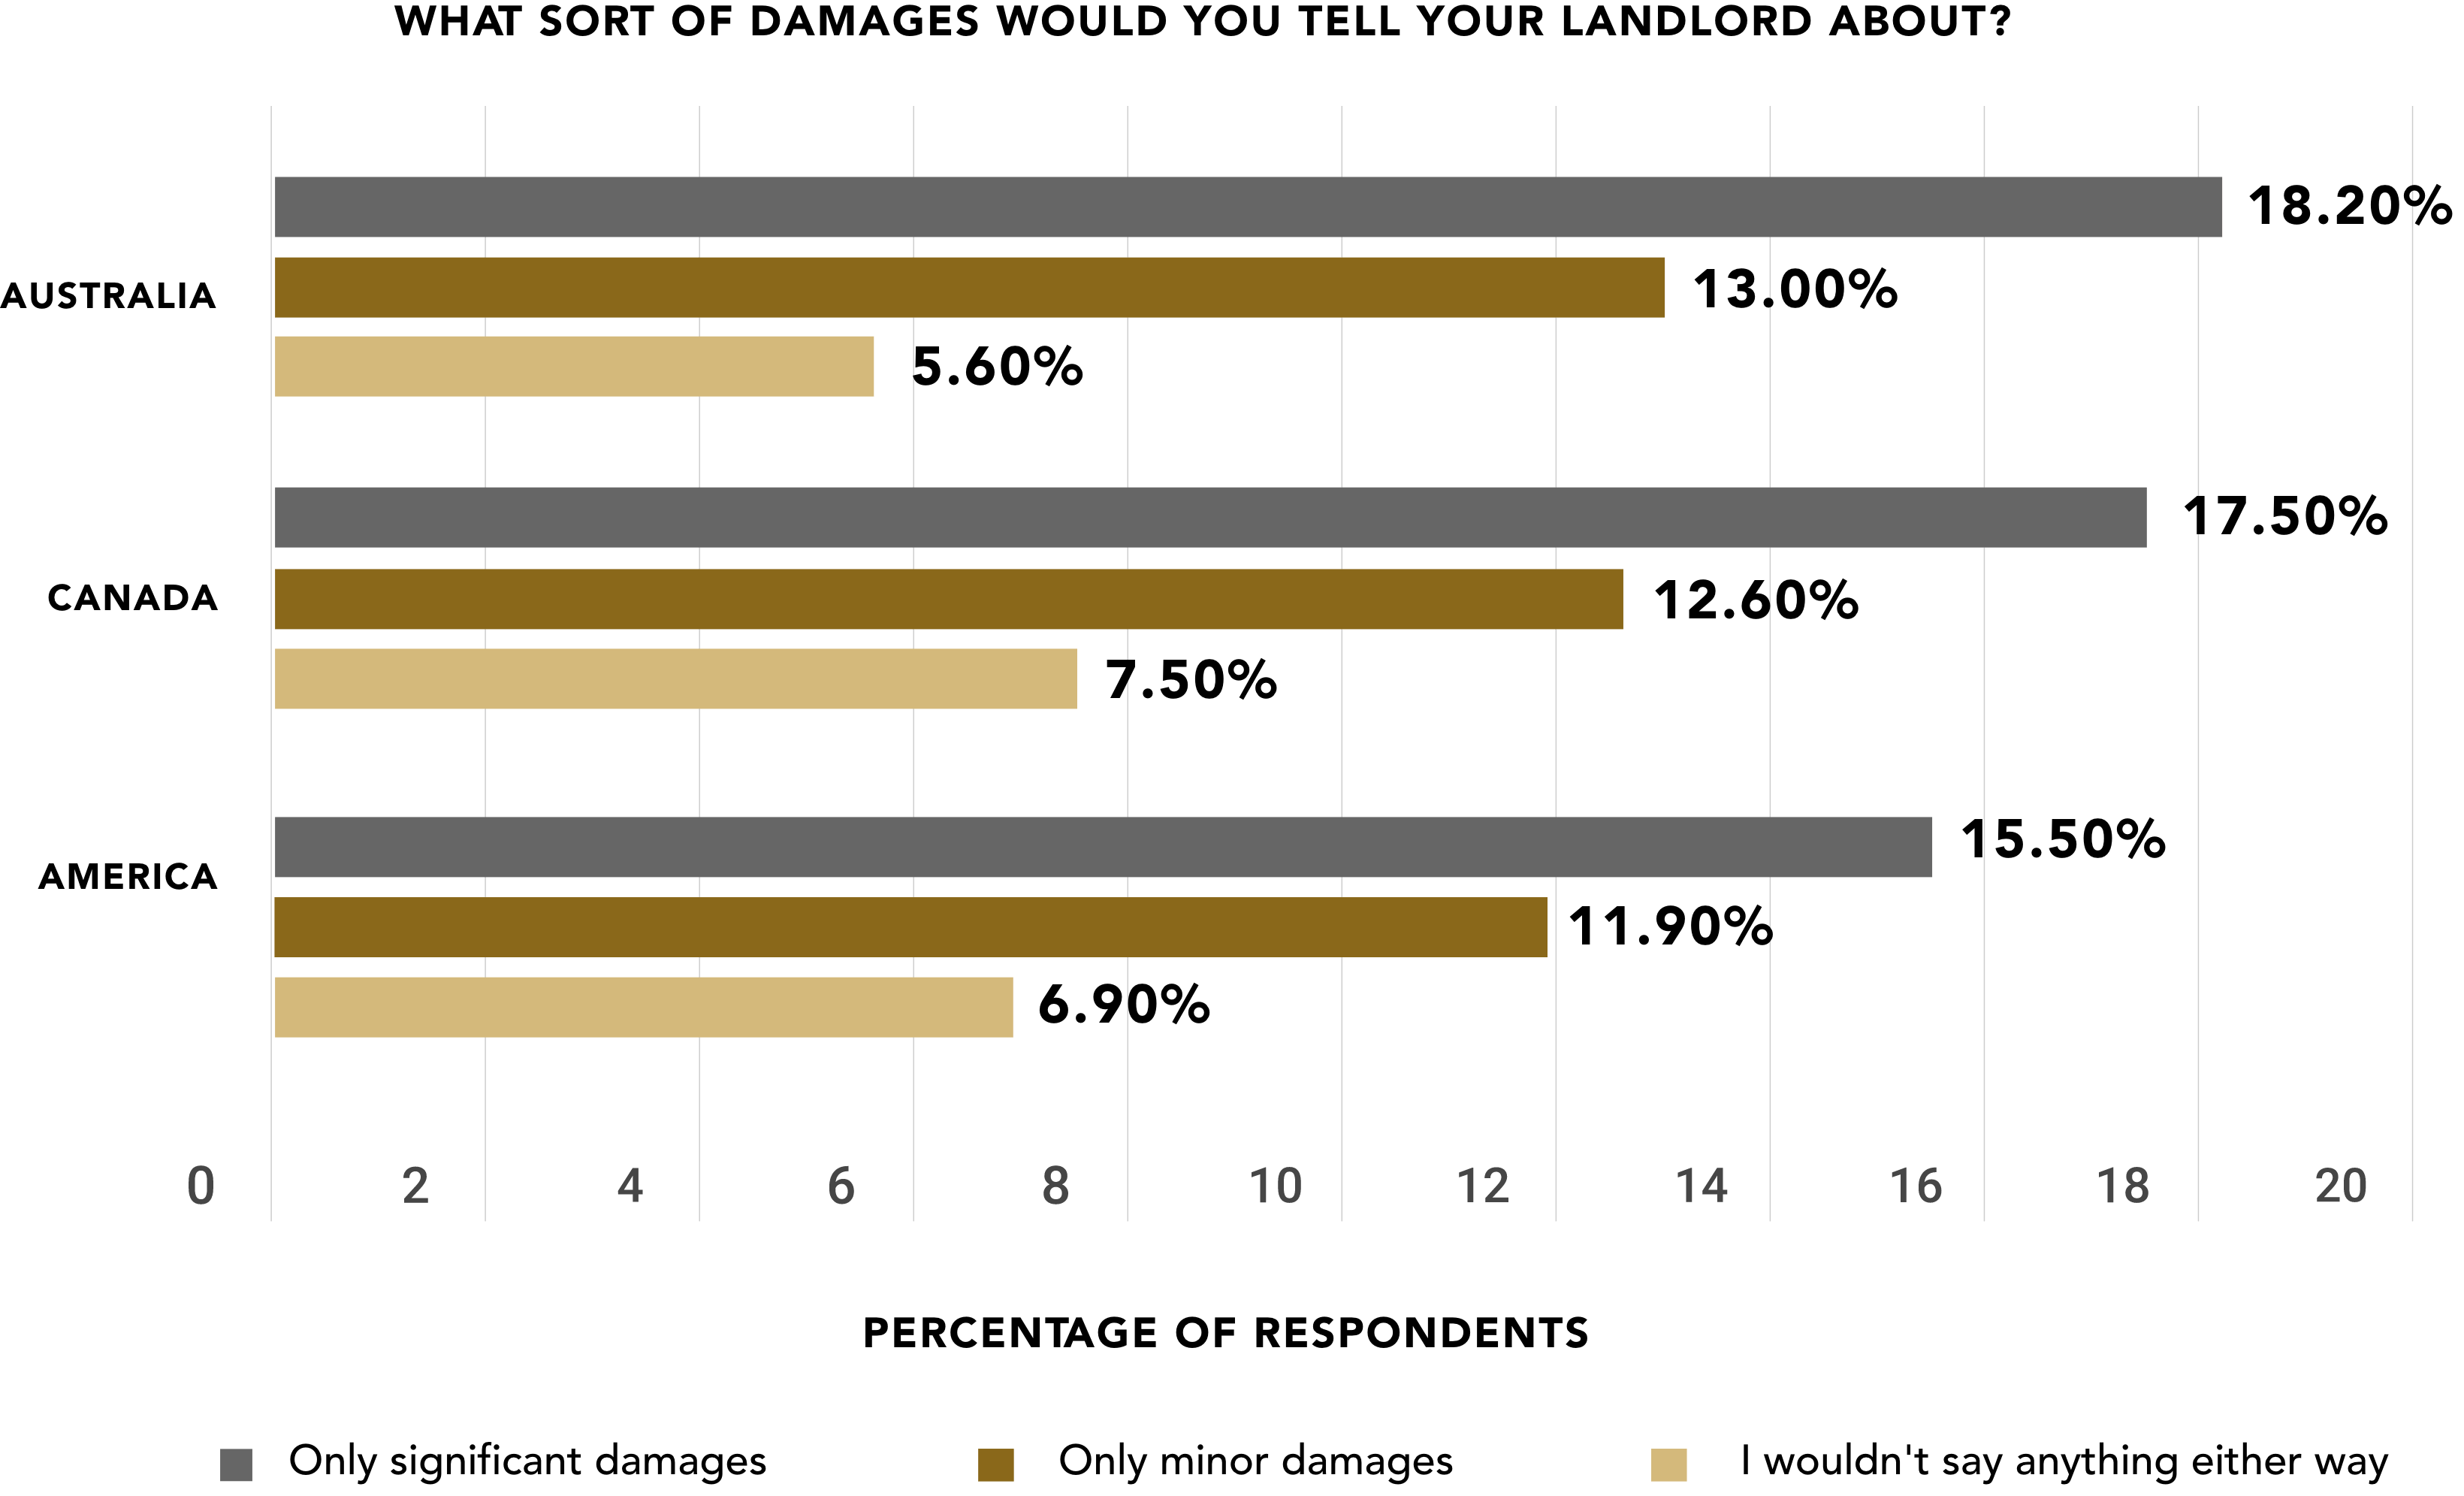 Bar chart showing the percentage of Australians, Canadians and Americans on what type of damages people would tell their landlord about